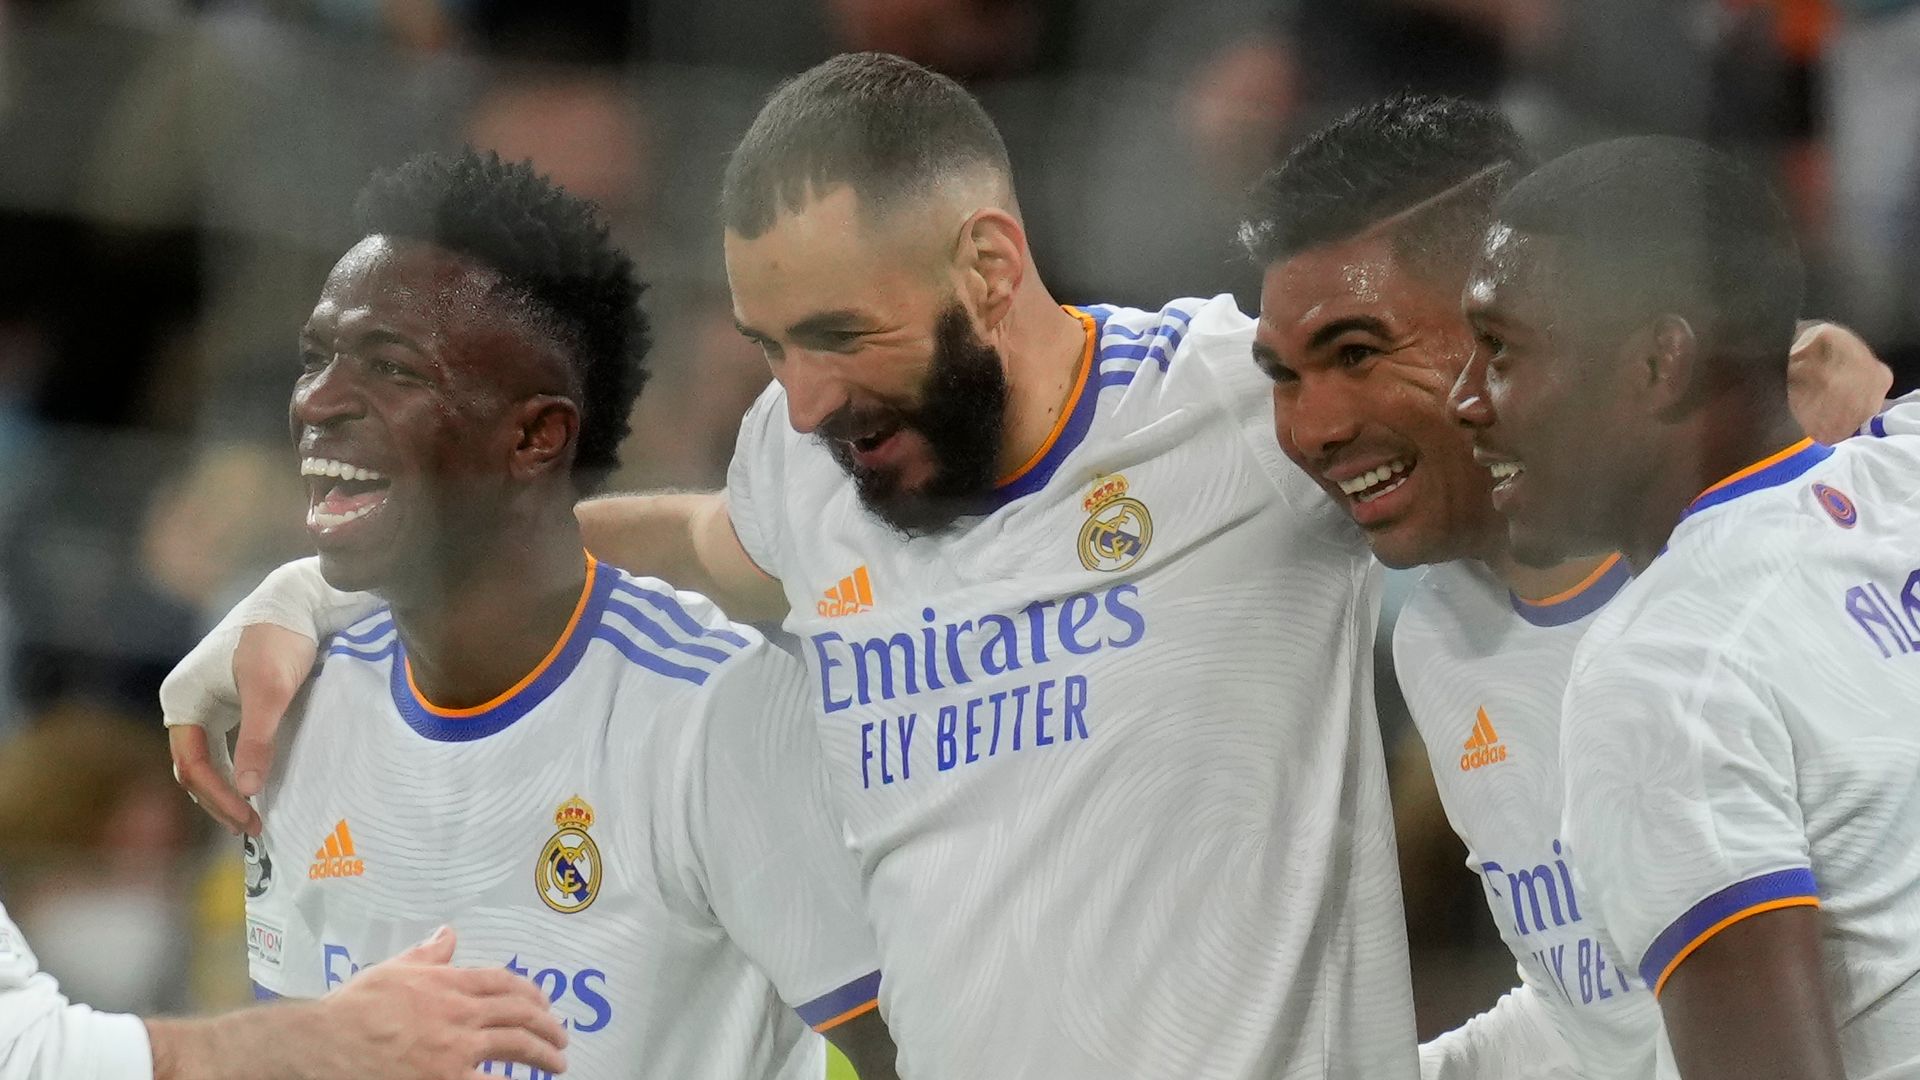 CL round-up: Benzema leads Real to victory, PSG held